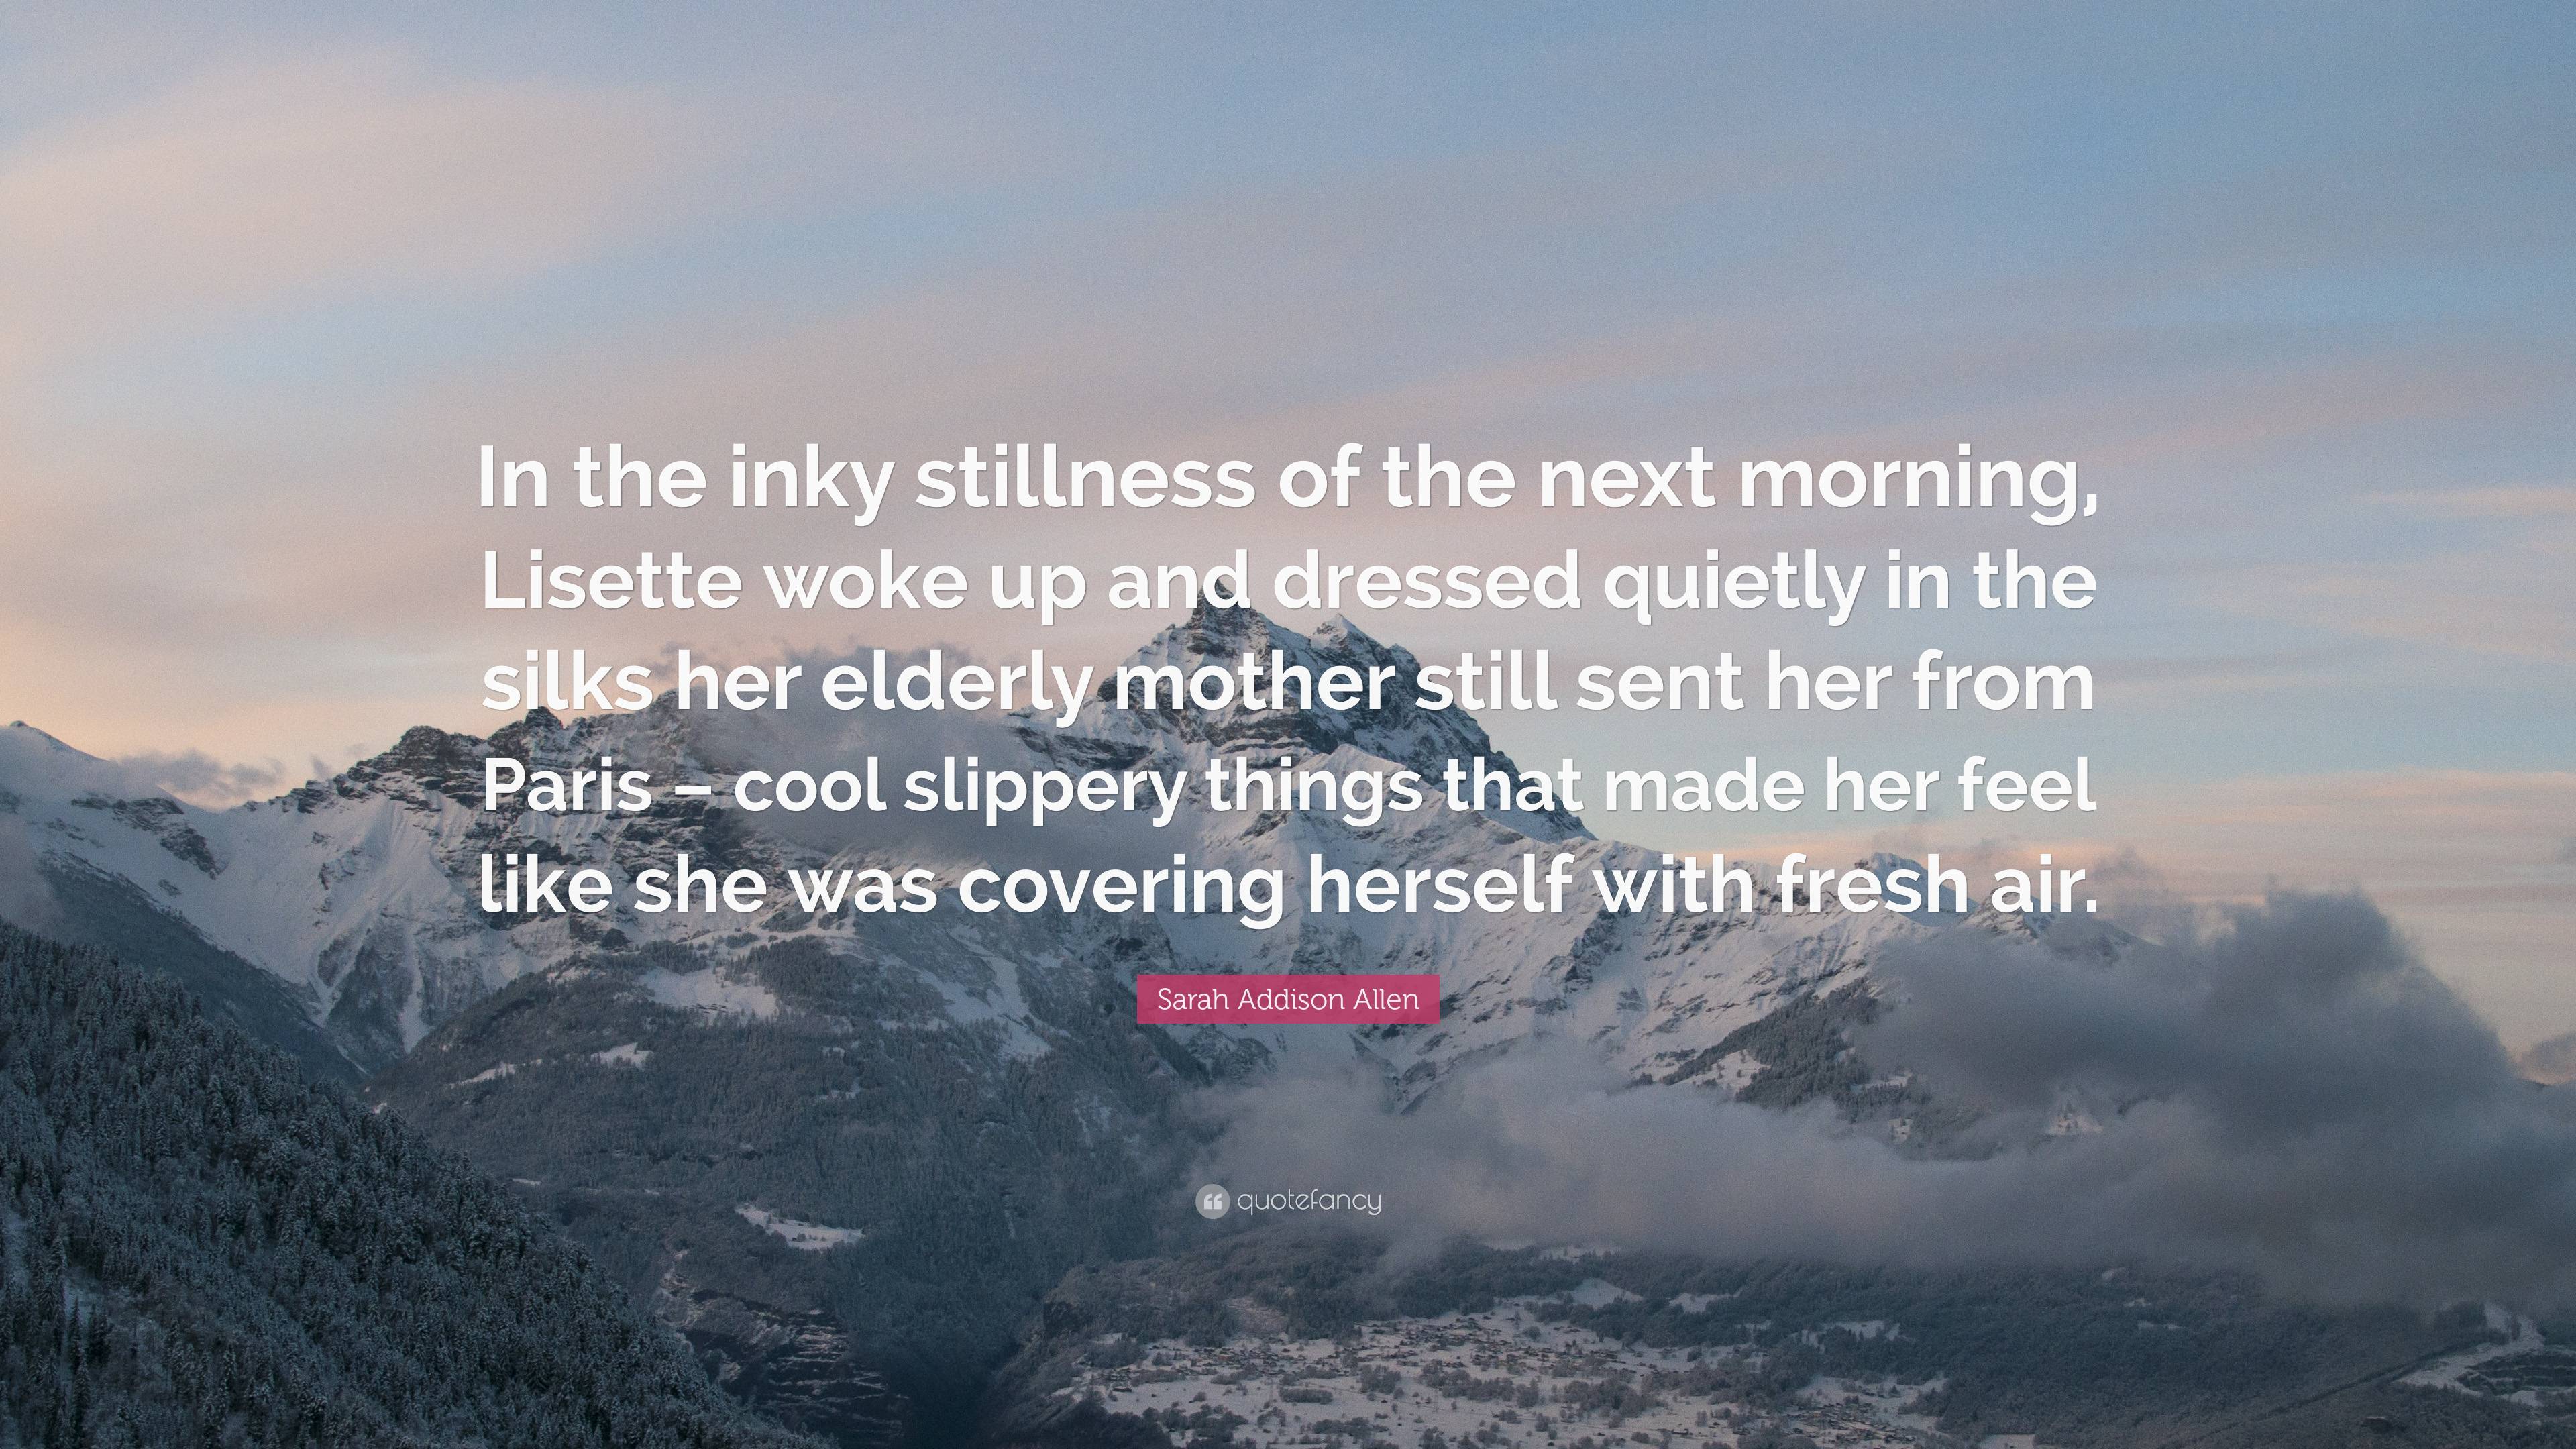 Sarah Addison Allen Quote: “In the inky stillness of the next morning ...